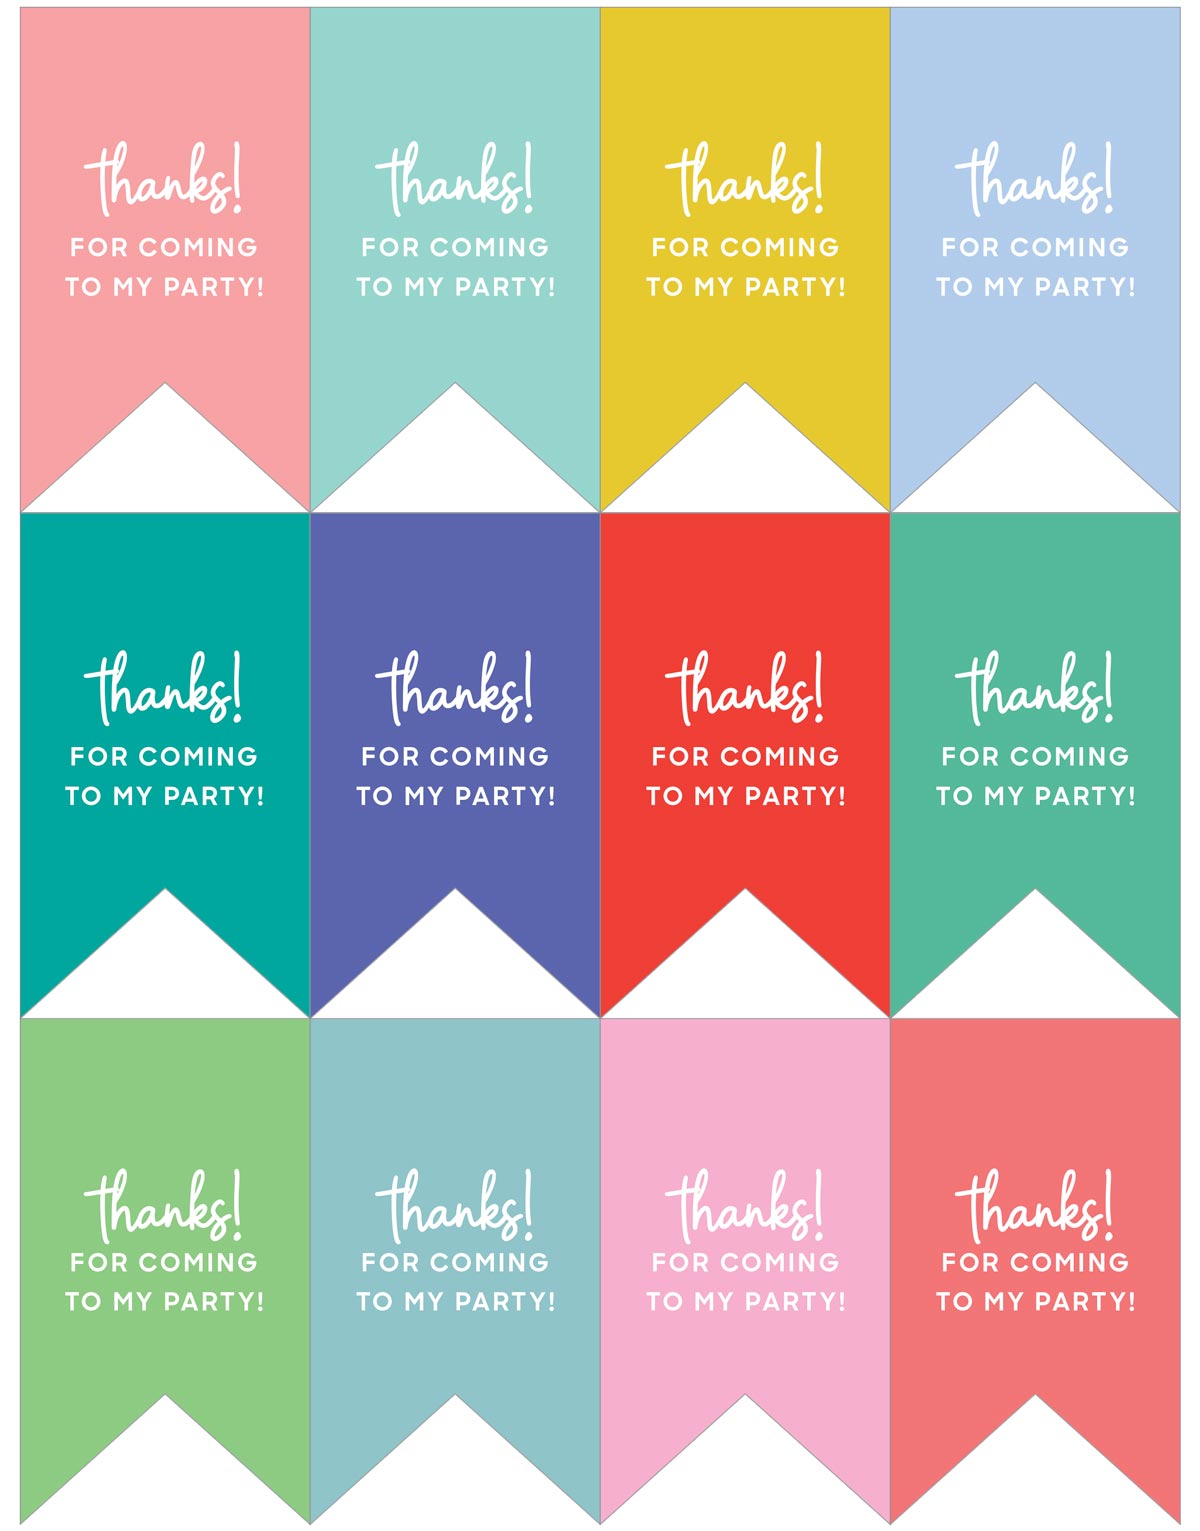 free printable thank you tags for favors in different colors